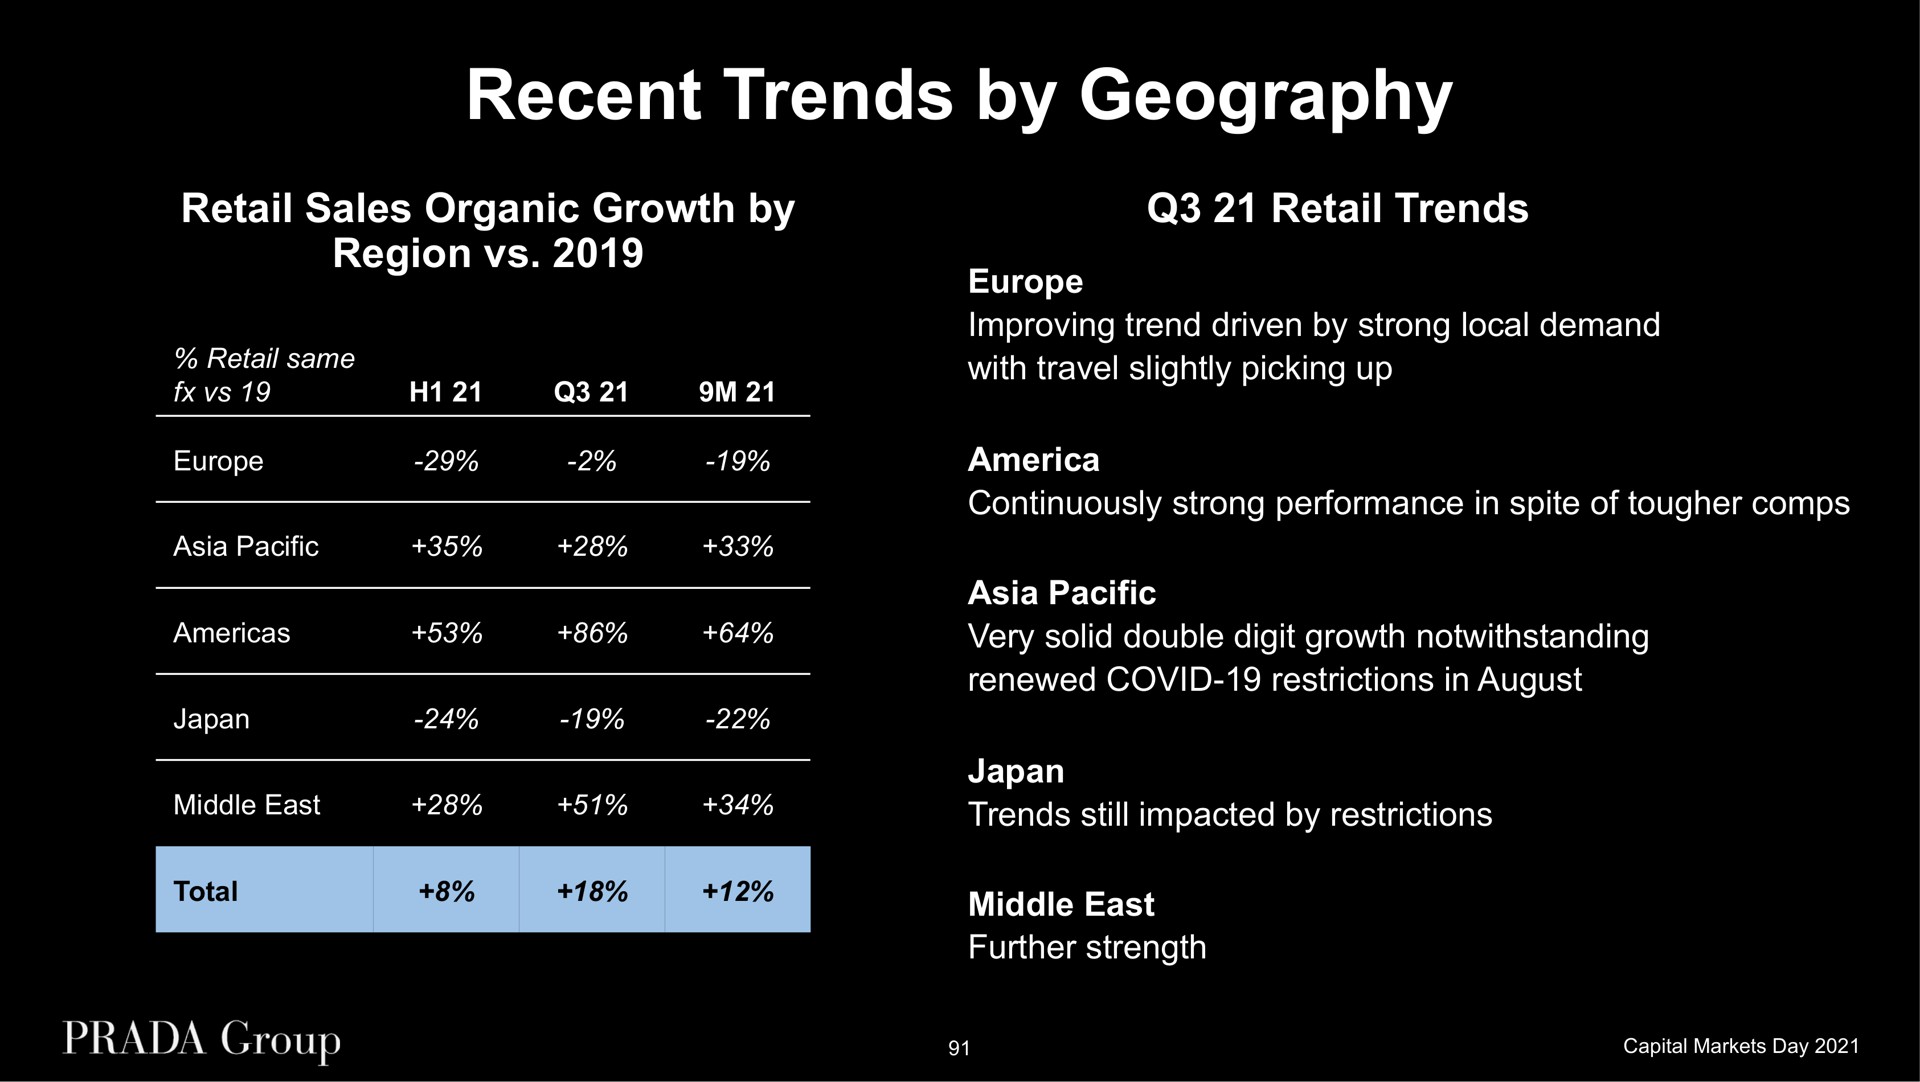 recent trends by geography retail sales organic growth by region retail trends improving trend driven by strong local demand with travel slightly picking up continuously strong performance in spite of pacific very solid double digit growth notwithstanding renewed covid restrictions in august japan trends still impacted by restrictions middle east further strength | Prada